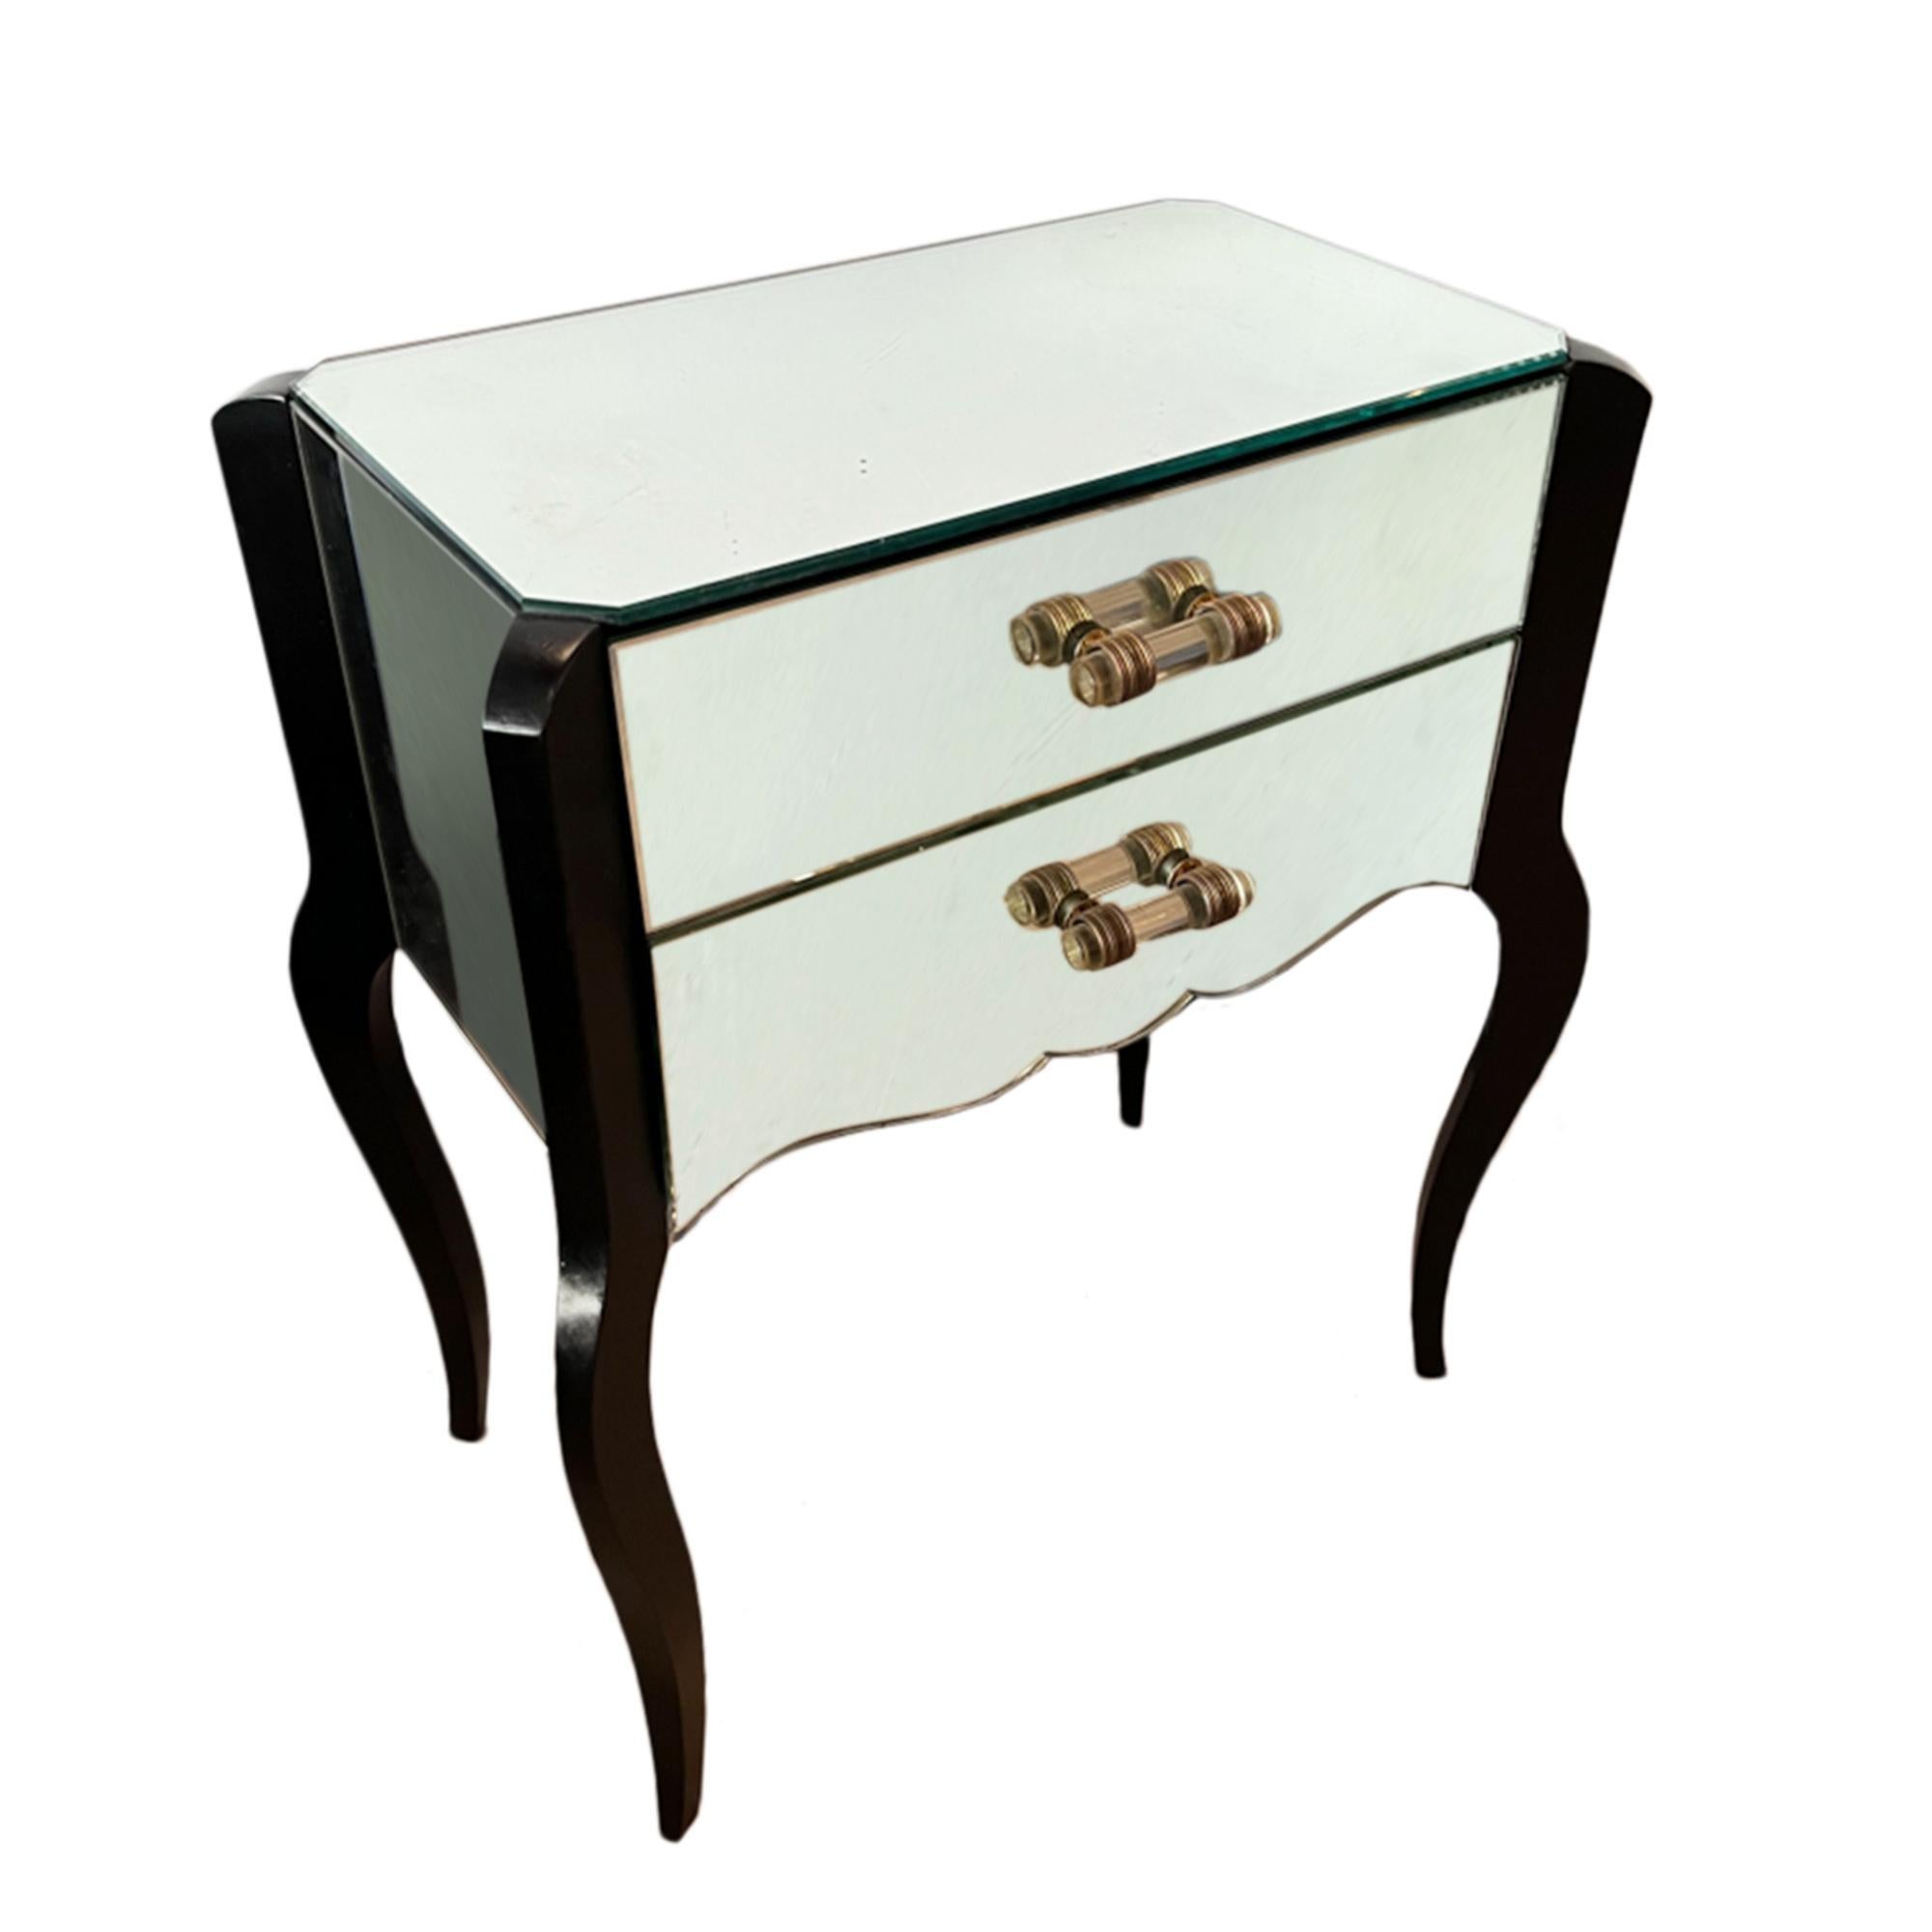 A gorgeous pair of mirrored bedside tables, made in France in the 1960s. 

With 2 drawers, elegant cabriole legs and nice detail on the handles. 

A good pair of mid century nightstands.